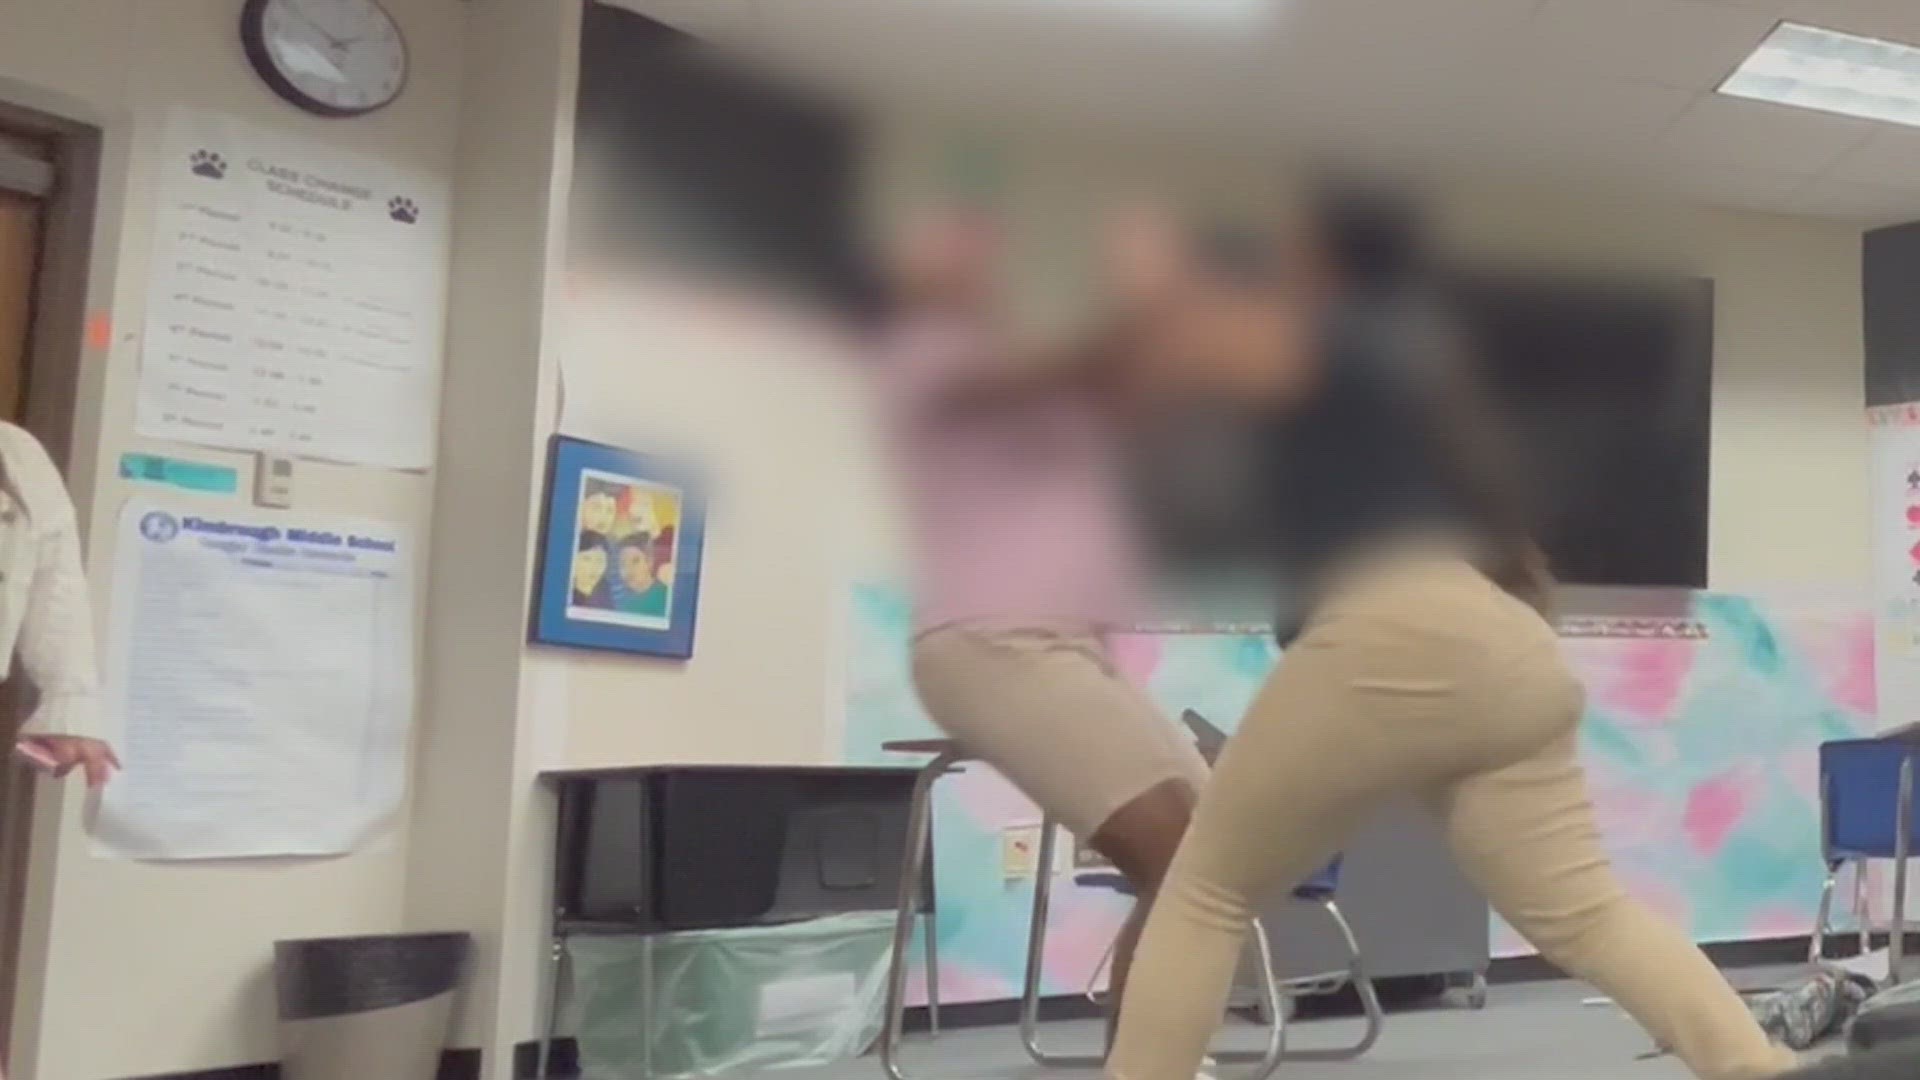 Students And Teacher - Texas teacher who allegedly allowed fights in class arrested | wfaa.com